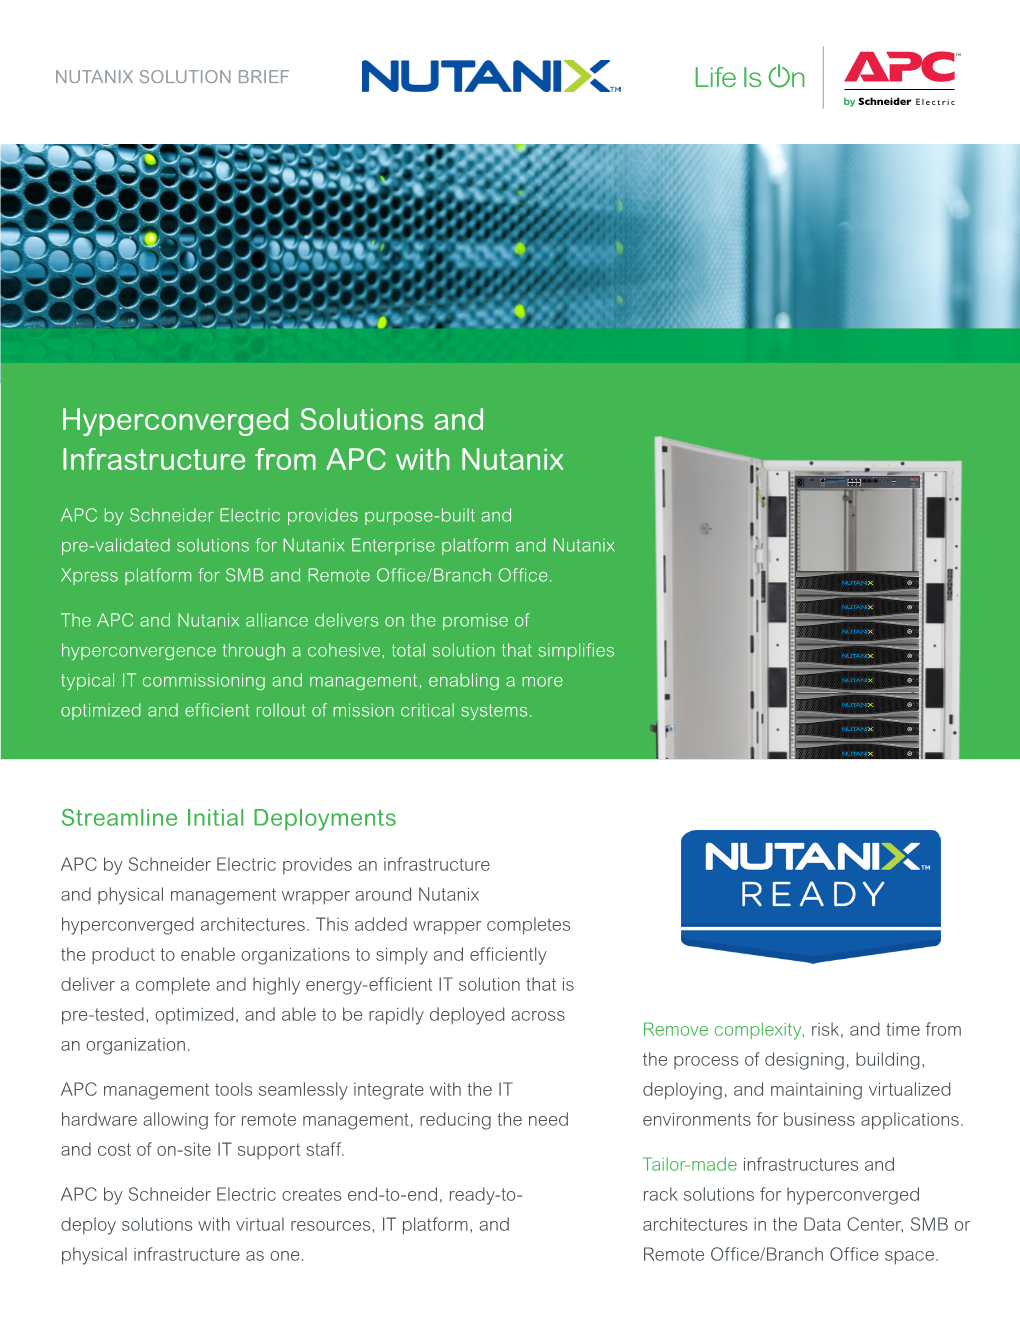 Hyperconverged Solutions and Infrastructure from APC with Nutanix